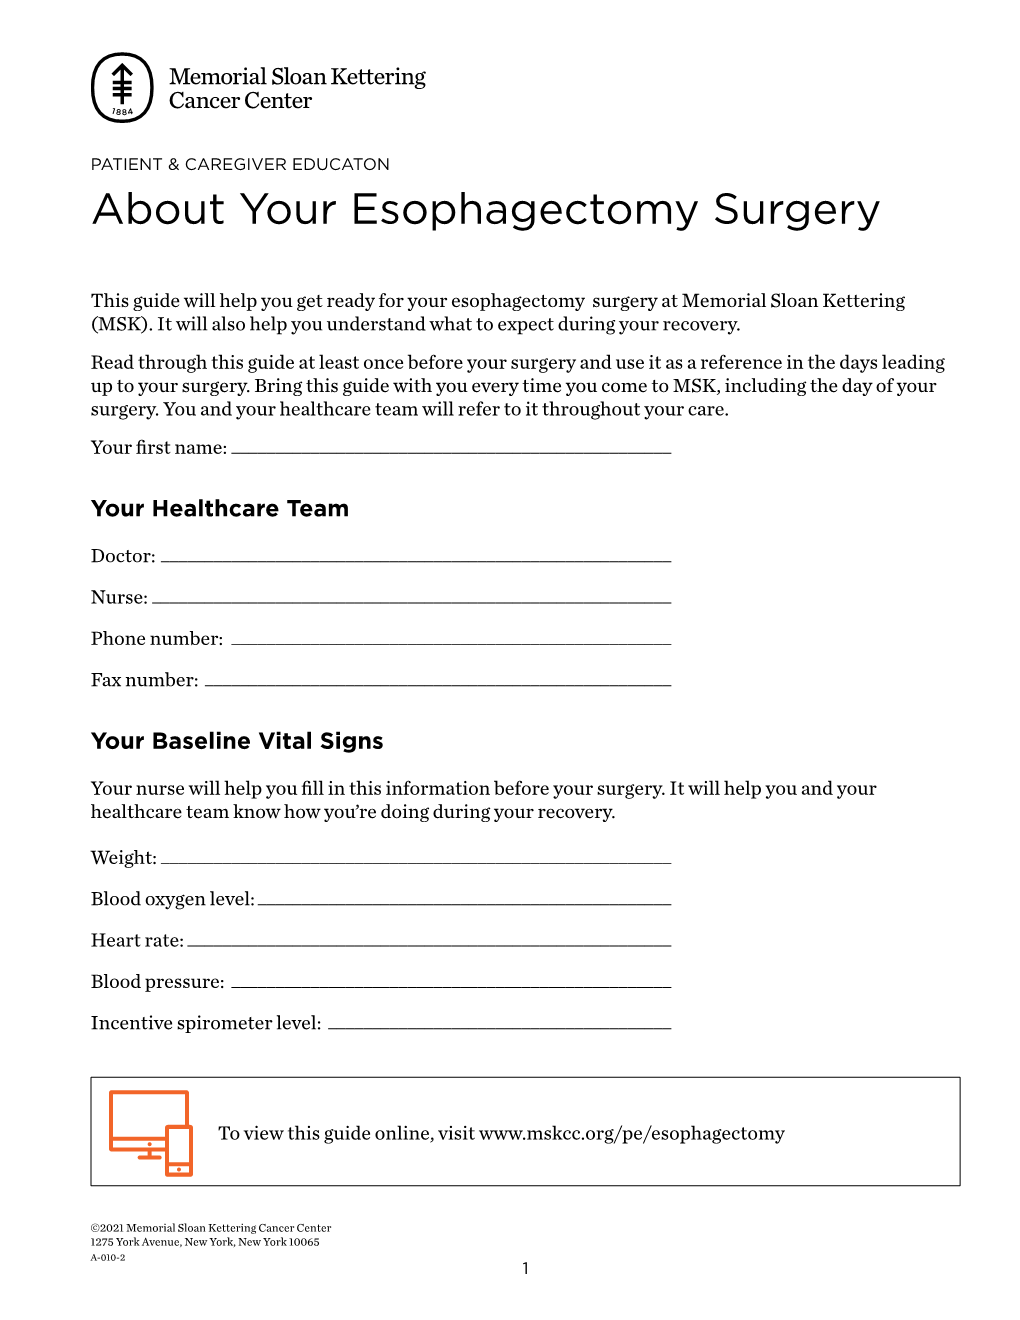 About Your Esophagectomy Surgery